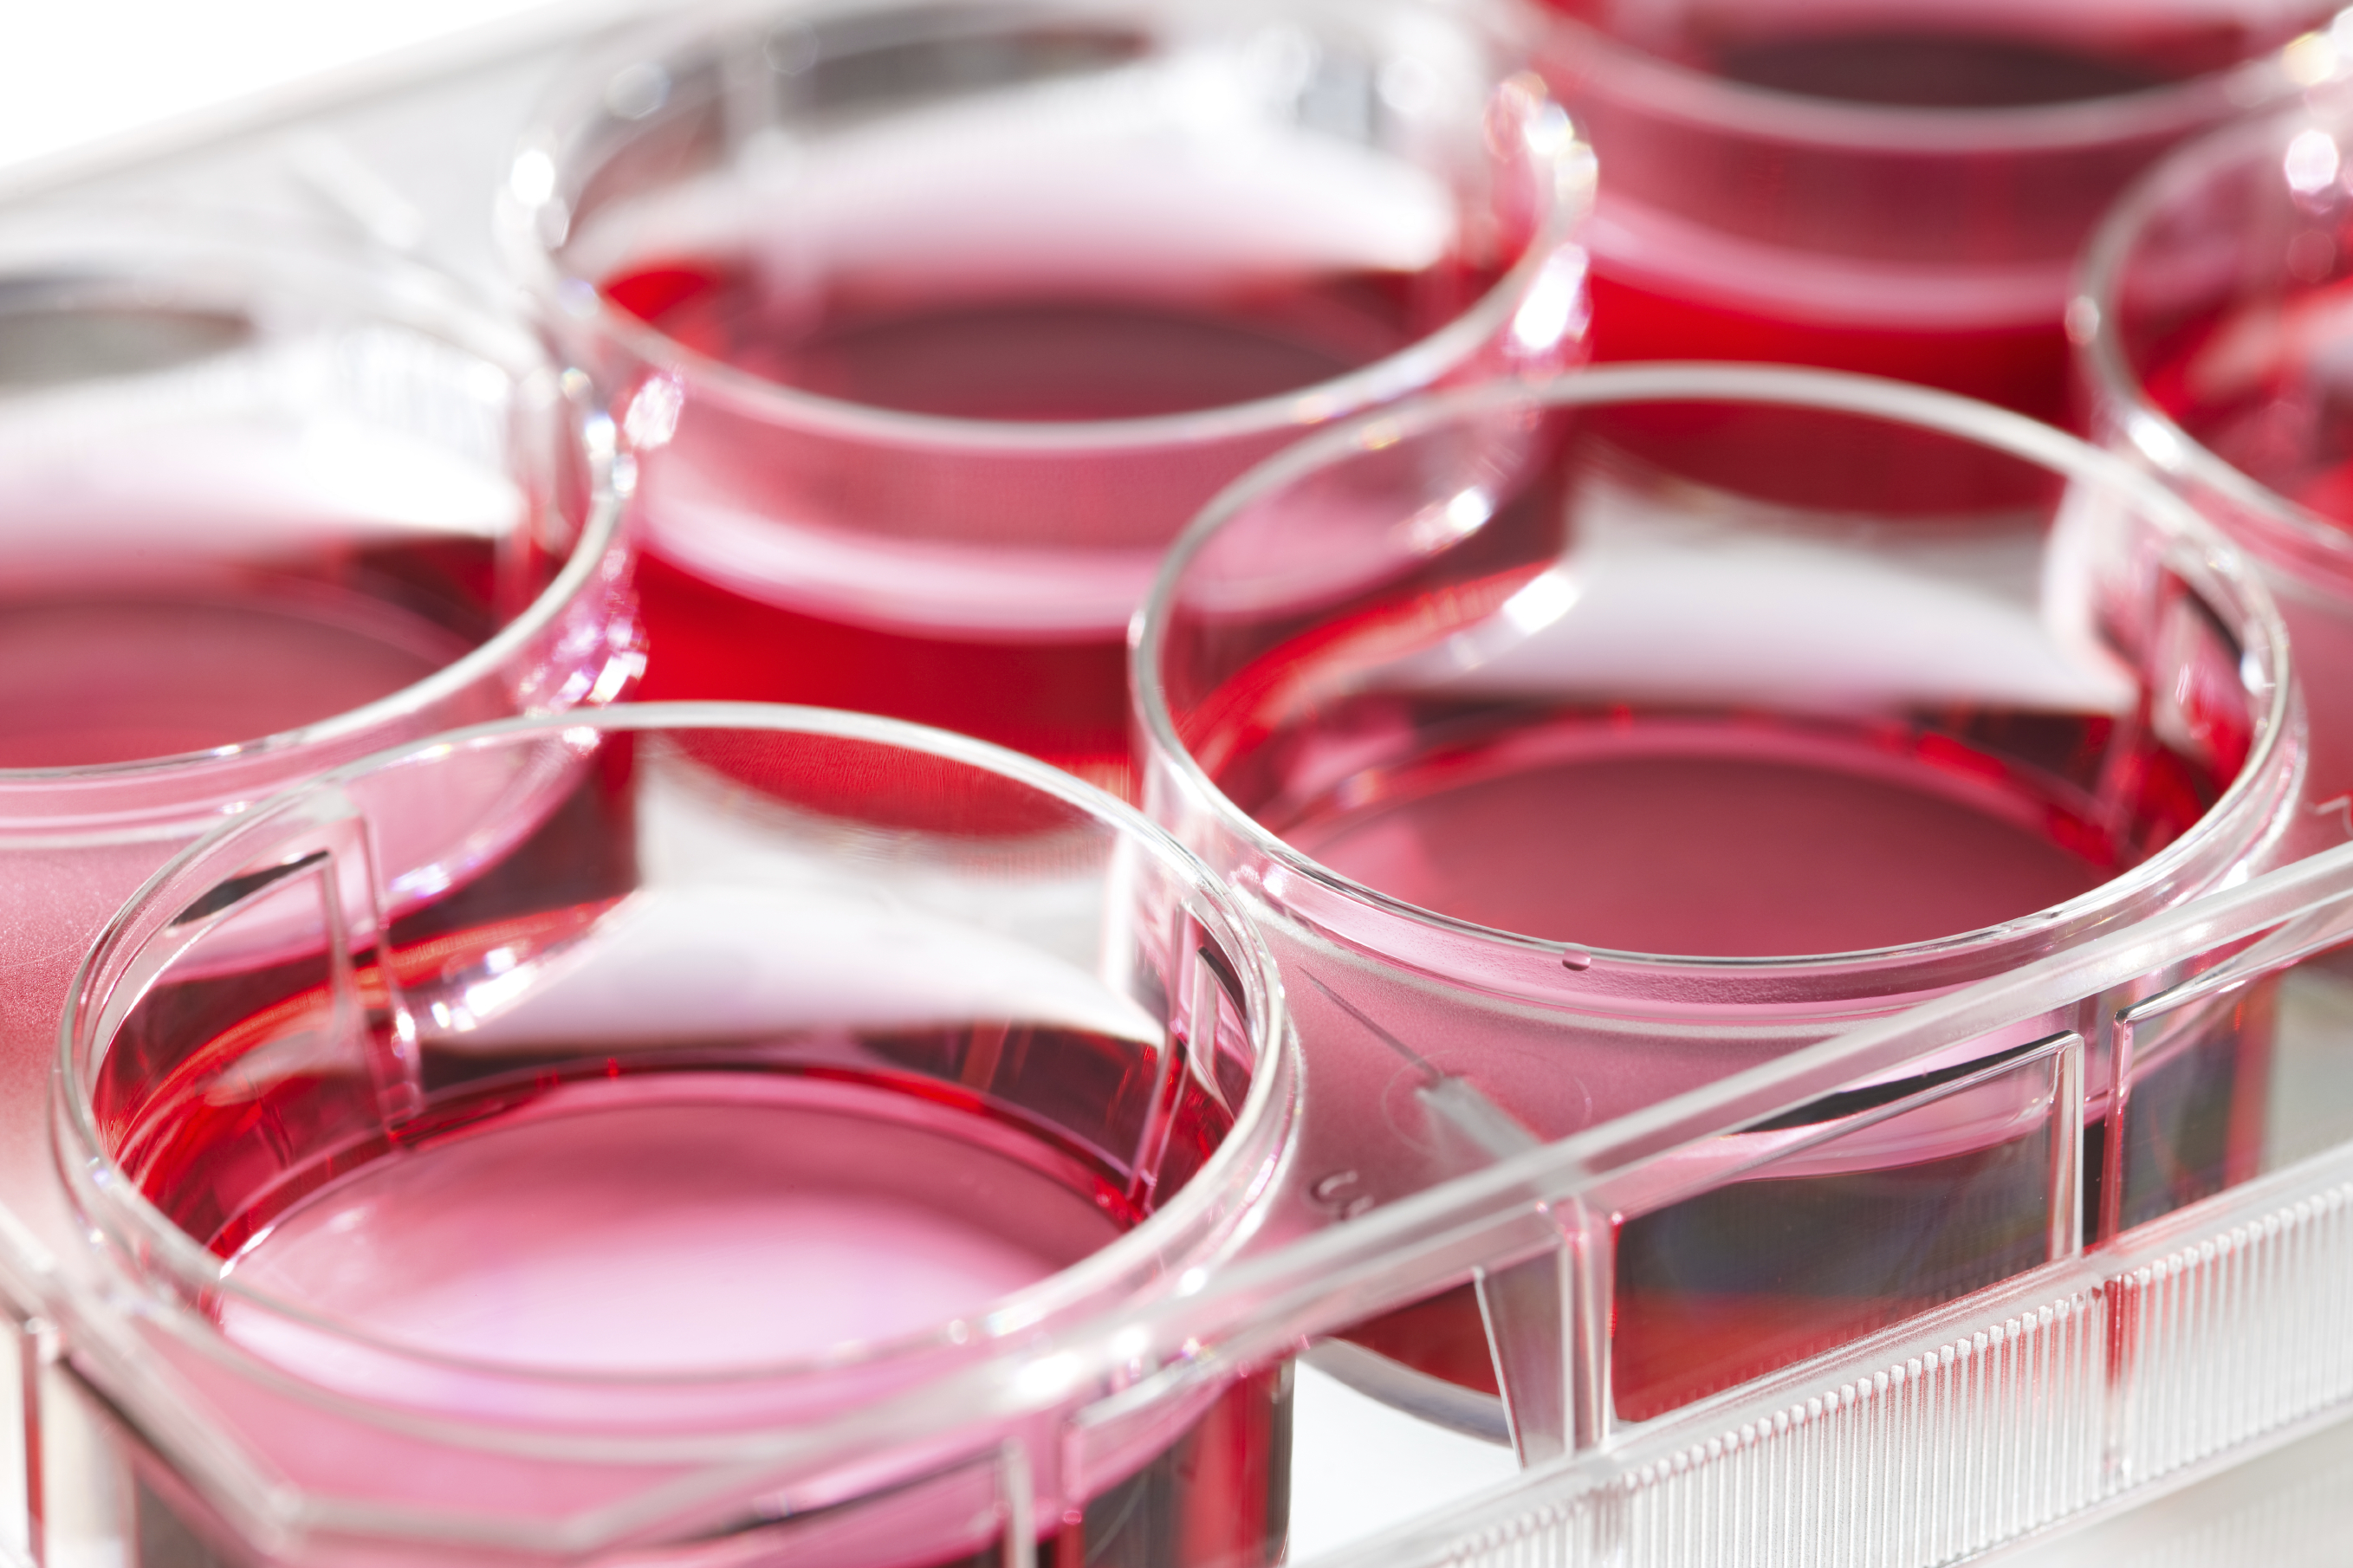 Cell Culture 1 Istock 000010604462large